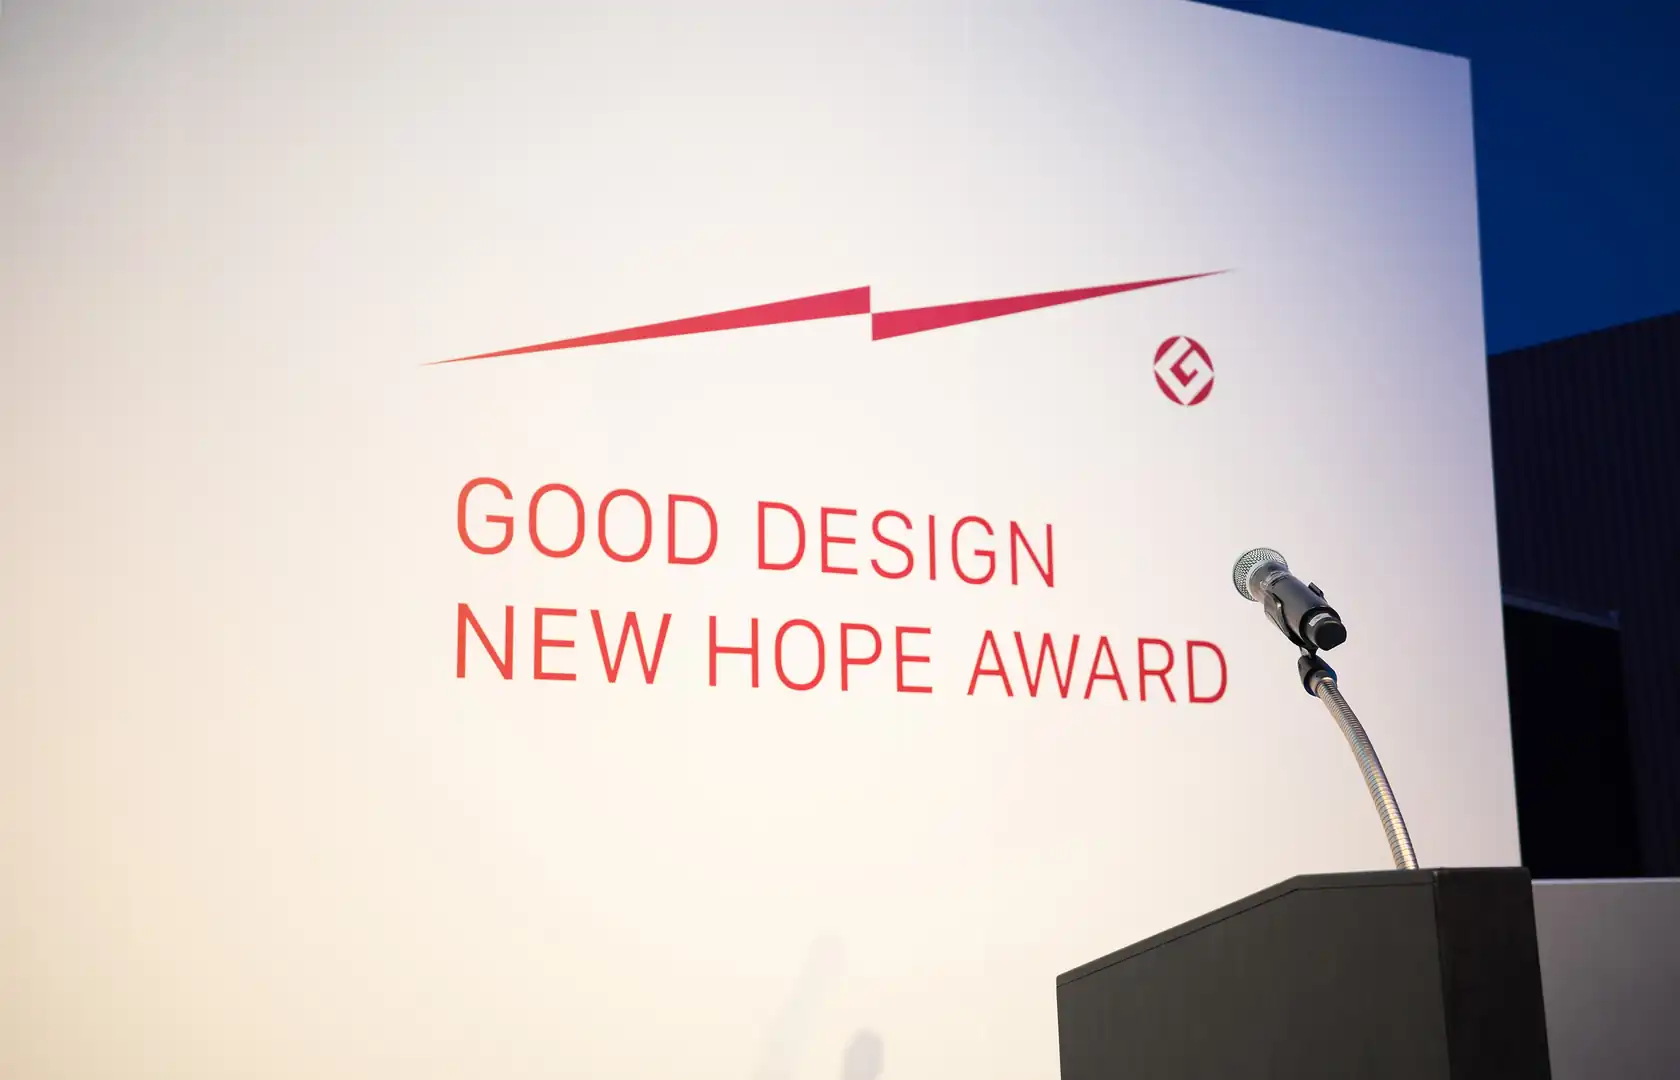 Applications for GOOD DESIGN NEW HOPE AWARD
The deadline is August 15 at 1 p.m. (JST).